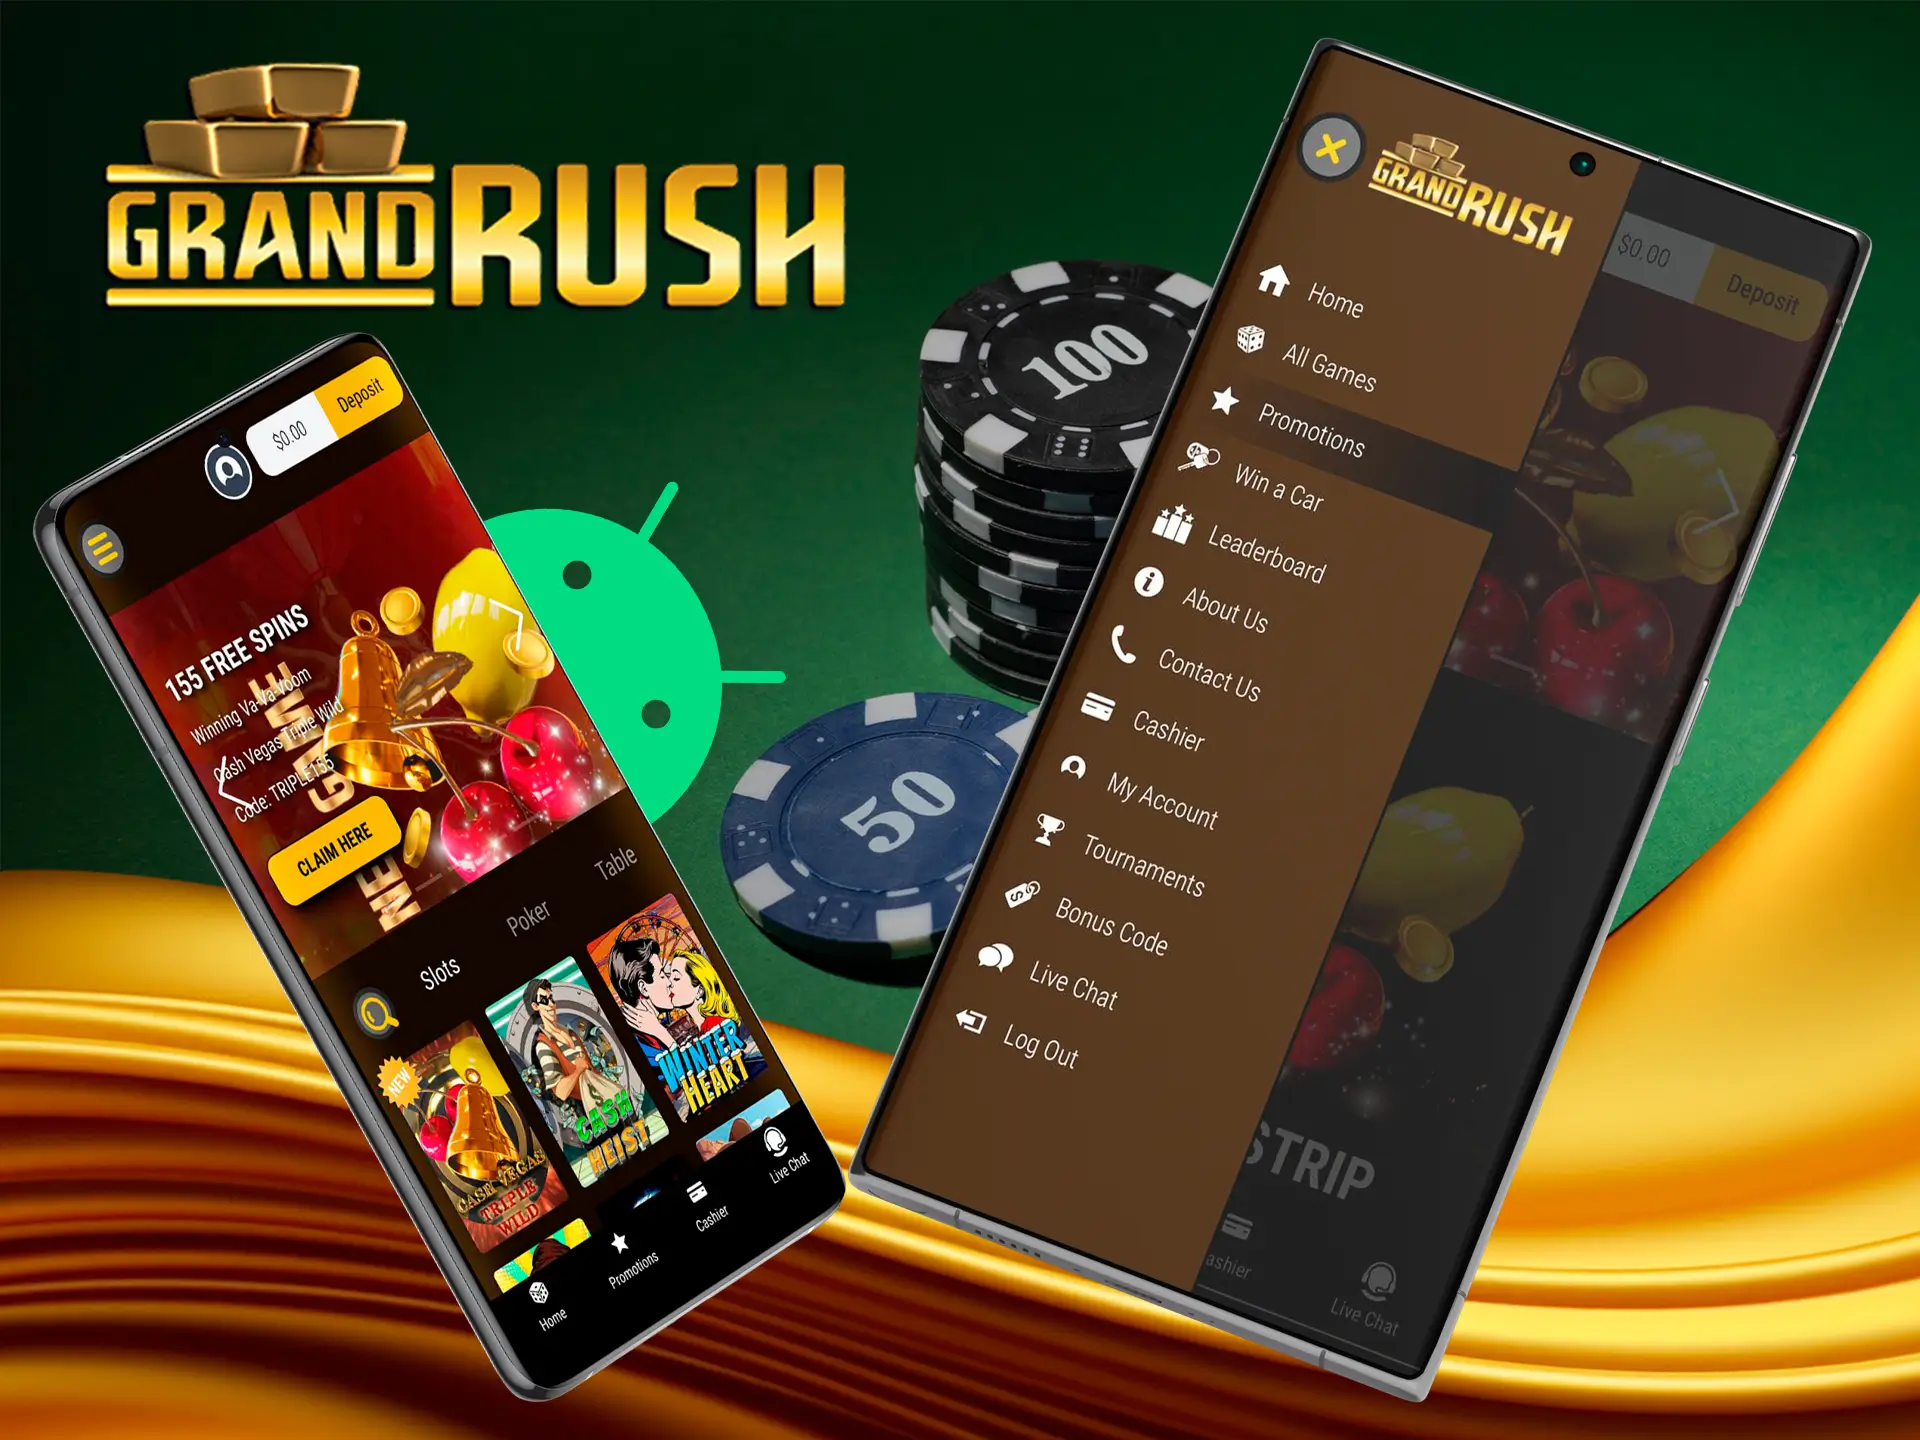 Grand Rush app is compatible with all Android devices.